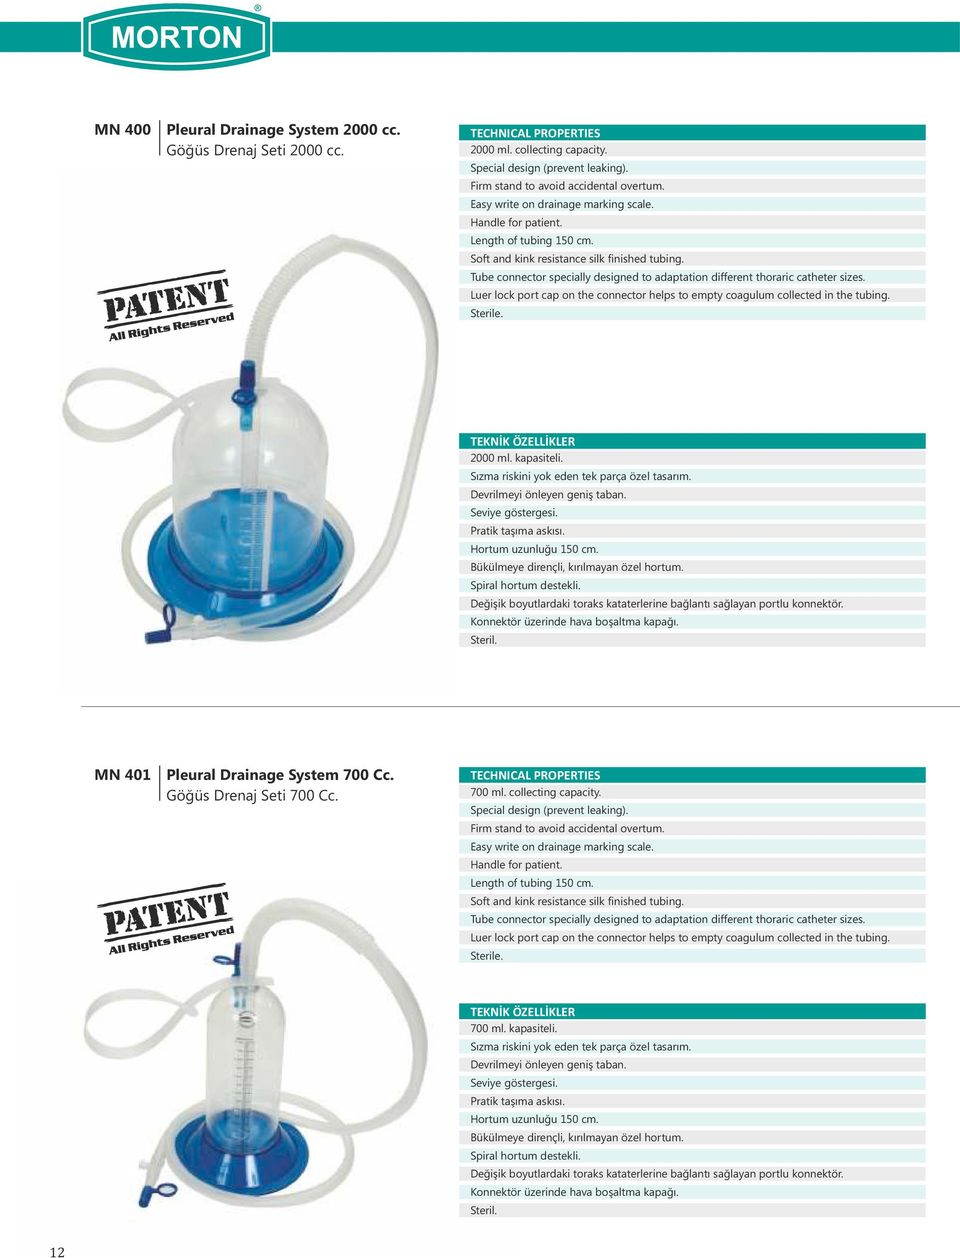 Tube connector specially designed to adaptation different thoraric catheter sizes. Luer lock port cap on the connector helps to empty coagulum collected in the tubing. Sterile. 2000 ml. kapasiteli.